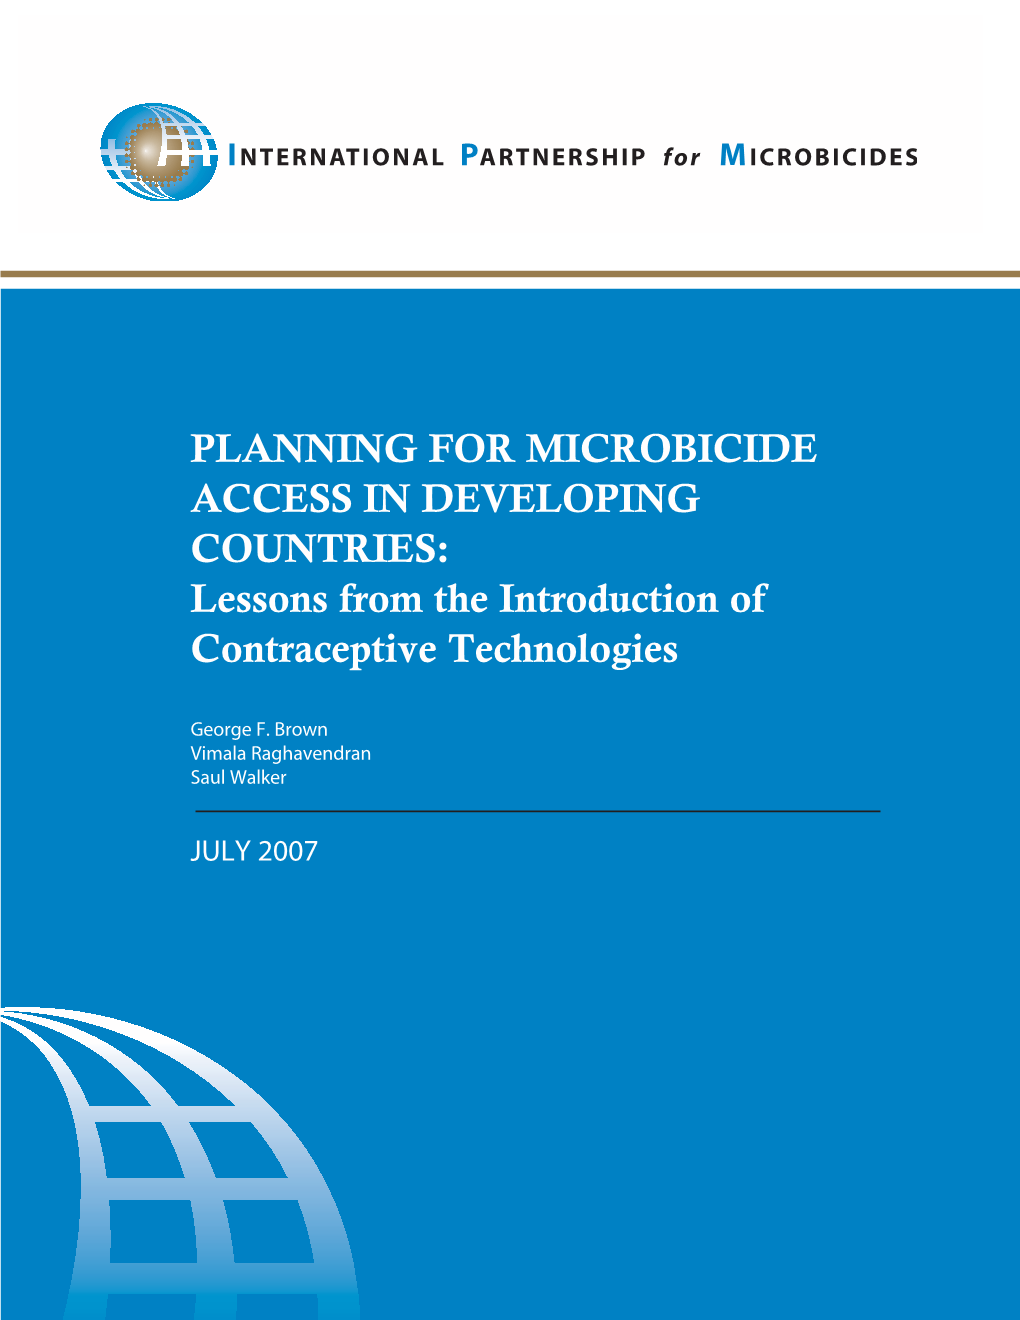 PLANNING for MICROBICIDE ACCESS in DEVELOPING COUNTRIES: Lessons from the Introduction of Contraceptive Technologies